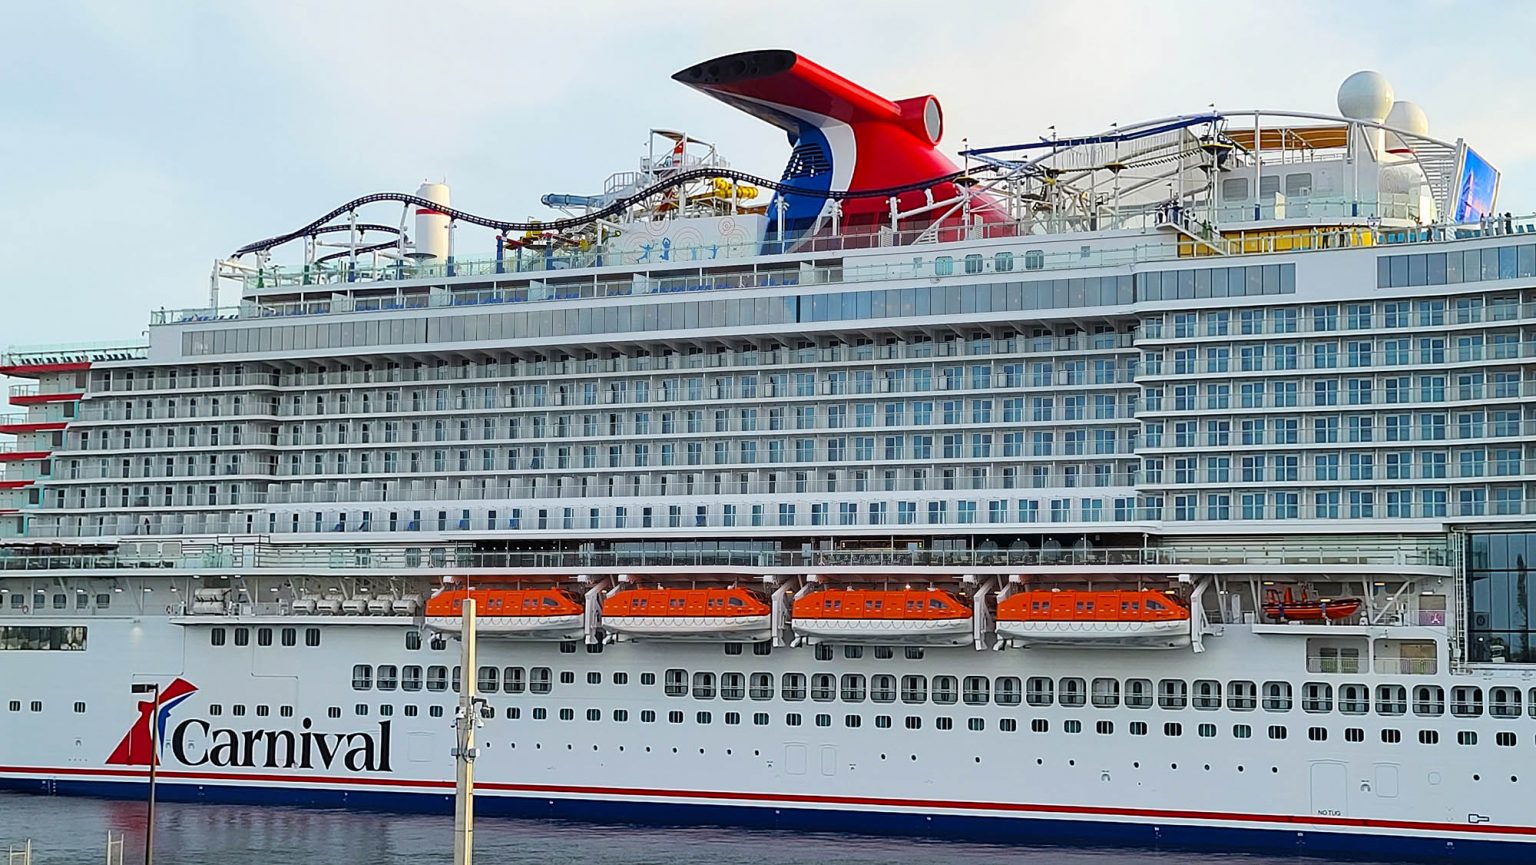 Carnivals Newest And Largest Cruise Ship Finally Debuts This Week